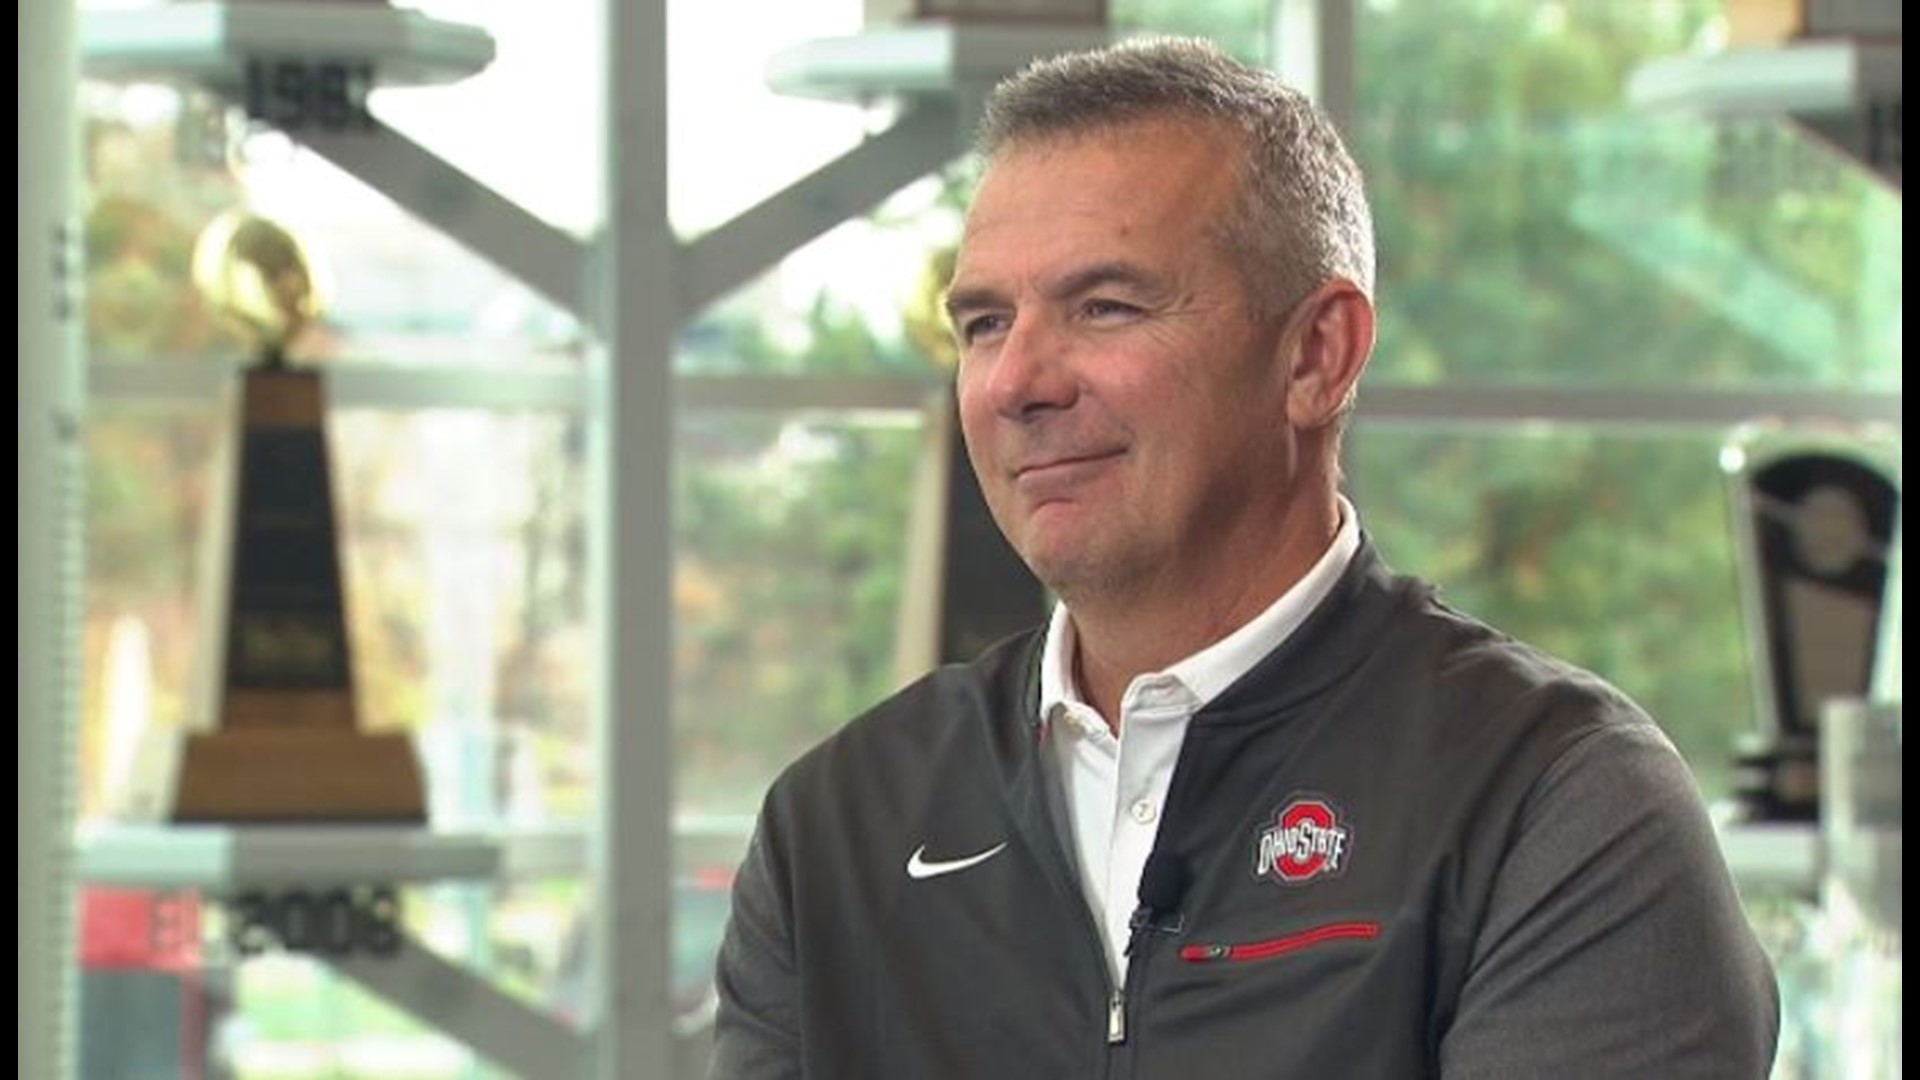 Urban Meyer says he has recovered from COVID19 after missing Fox